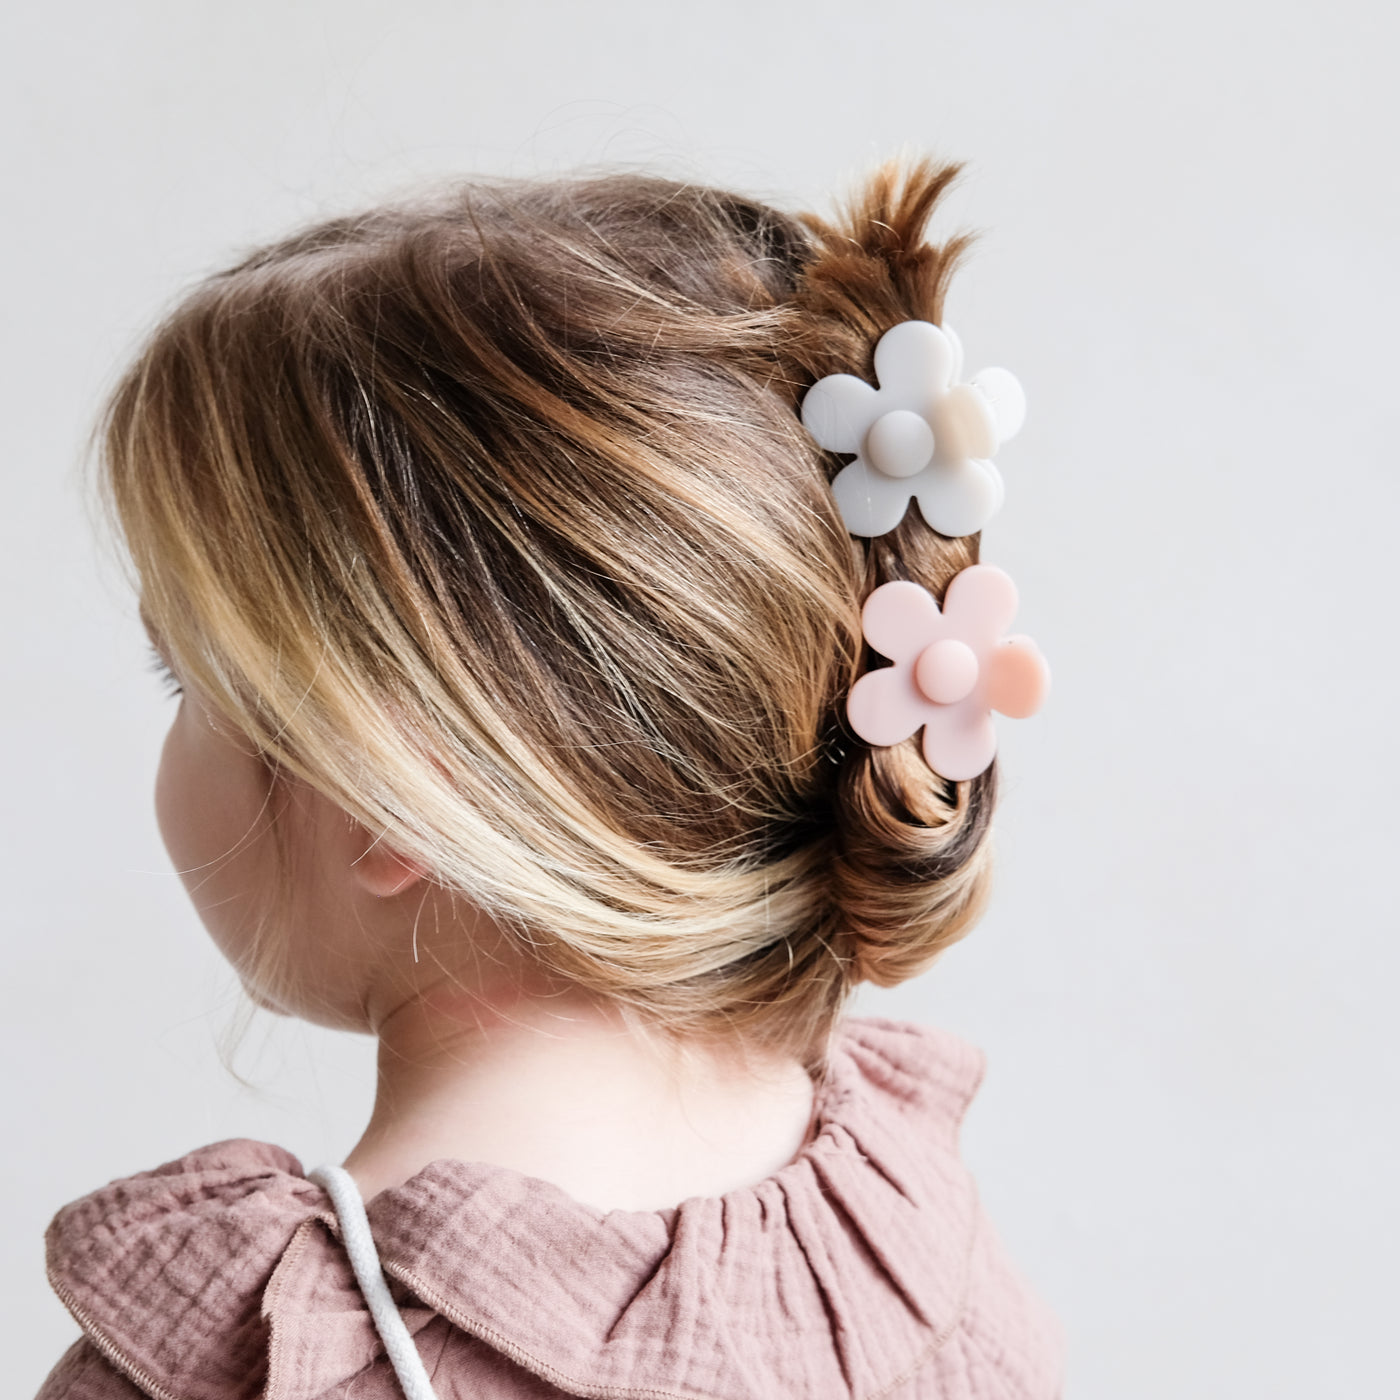 Dark blonde little girl with a twisted up do secured by beautiful daisy shaped bulldog clips in pale pink and cream